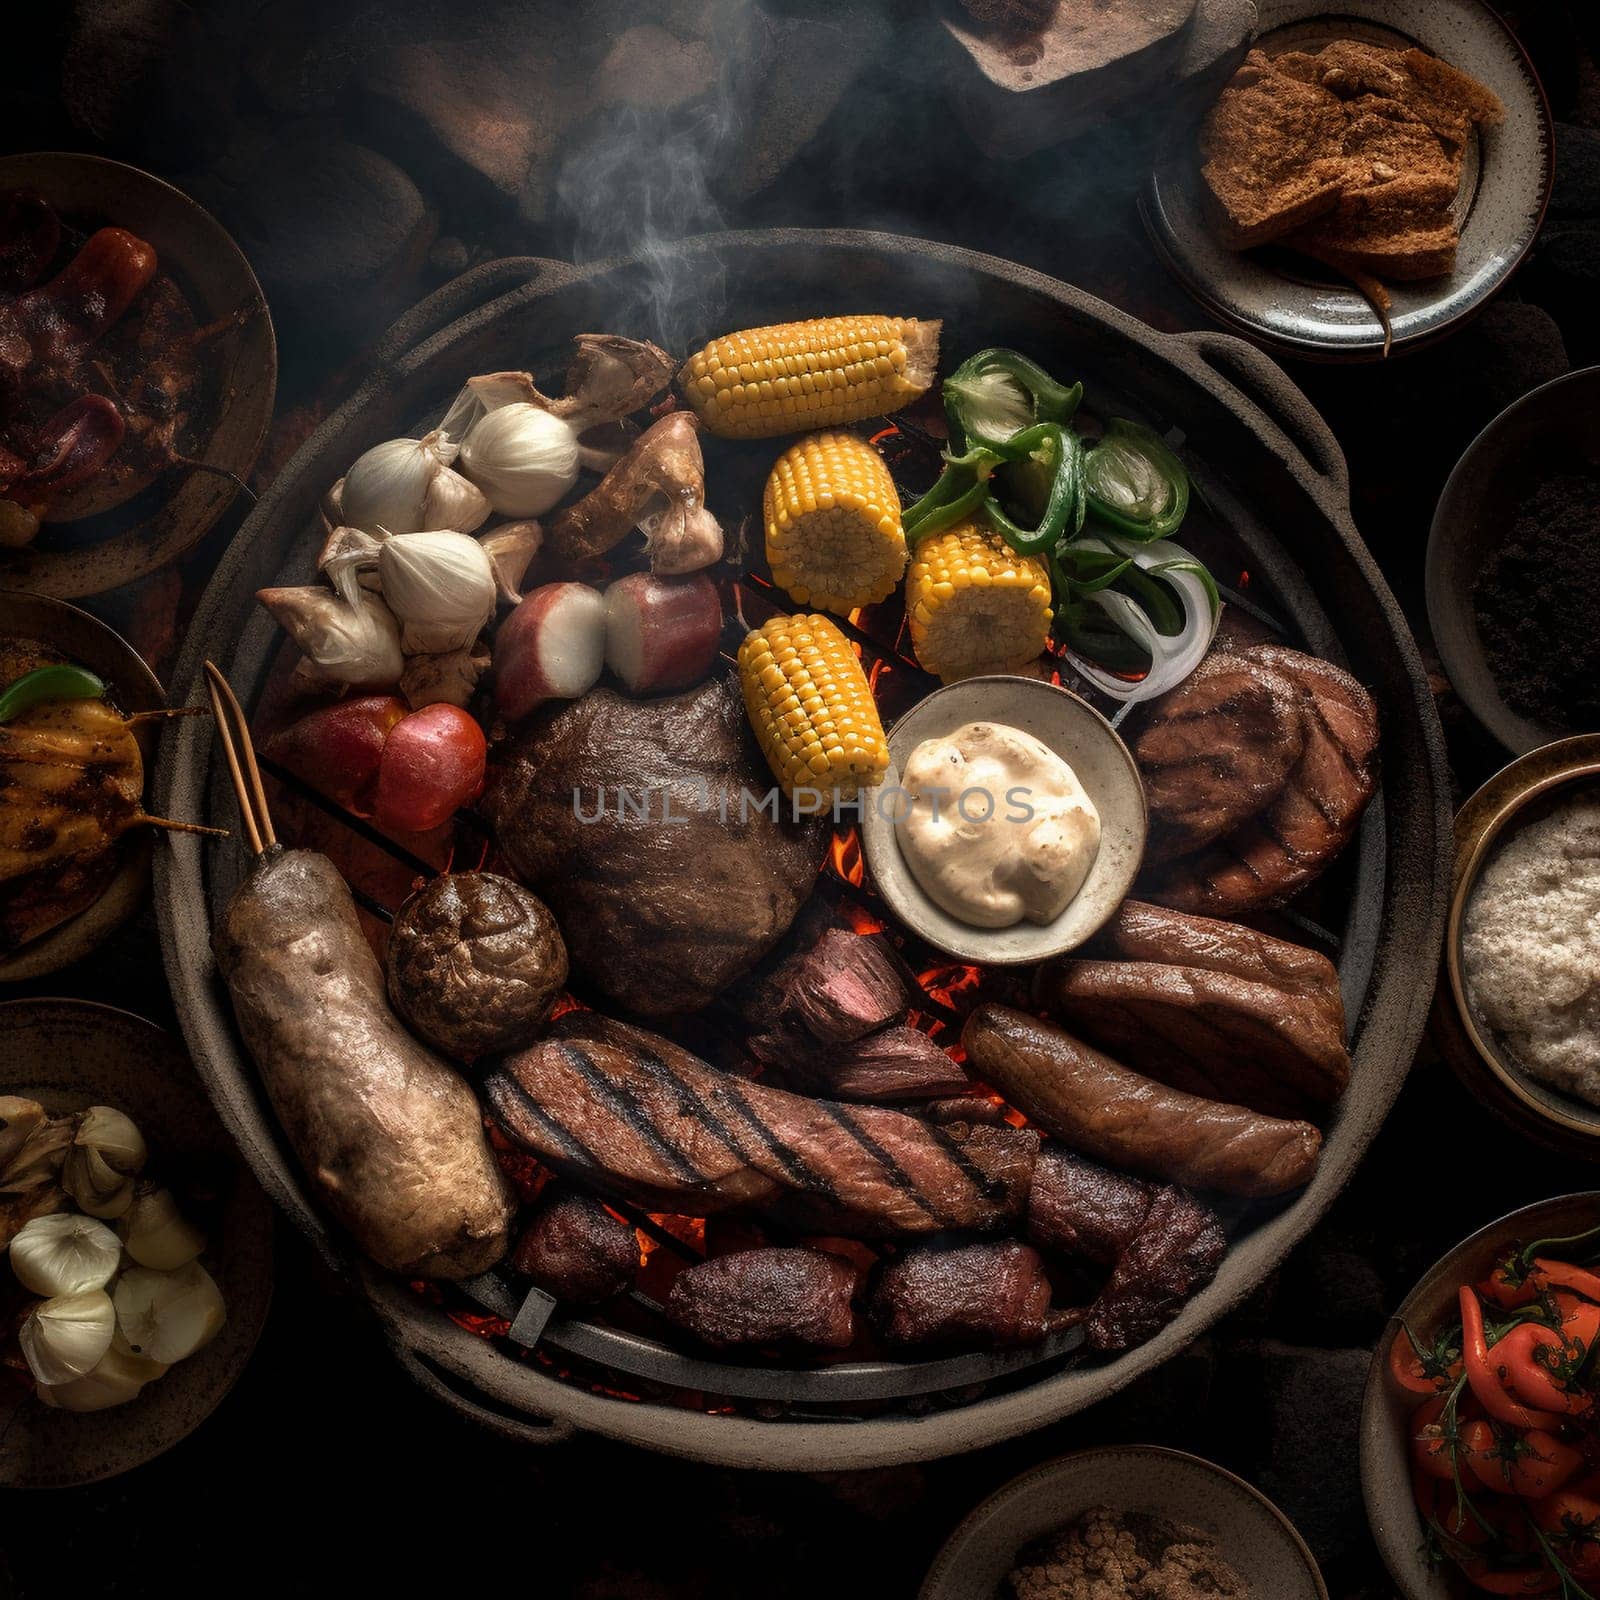 Indulge in the mouth-watering flavors and festive atmosphere of an Argentina Asado (barbecue) with this enticing overhead shot. The scene features a sizzling grill filled with a variety of meats, including beef, pork, and sausages, as well as grilled vegetables like peppers and onions. The meat is cooked to perfection, with a golden-brown crust and juicy pink interior, and is served on a wooden platter with chimichurri sauce on the side. In the background, there's a lively outdoor gathering of friends and family, with colorful decorations and music adding to the festive atmosphere. The soft, natural lighting with a diffuser highlights the textures and colors of the food, evoking feelings of warmth, togetherness, and celebration.